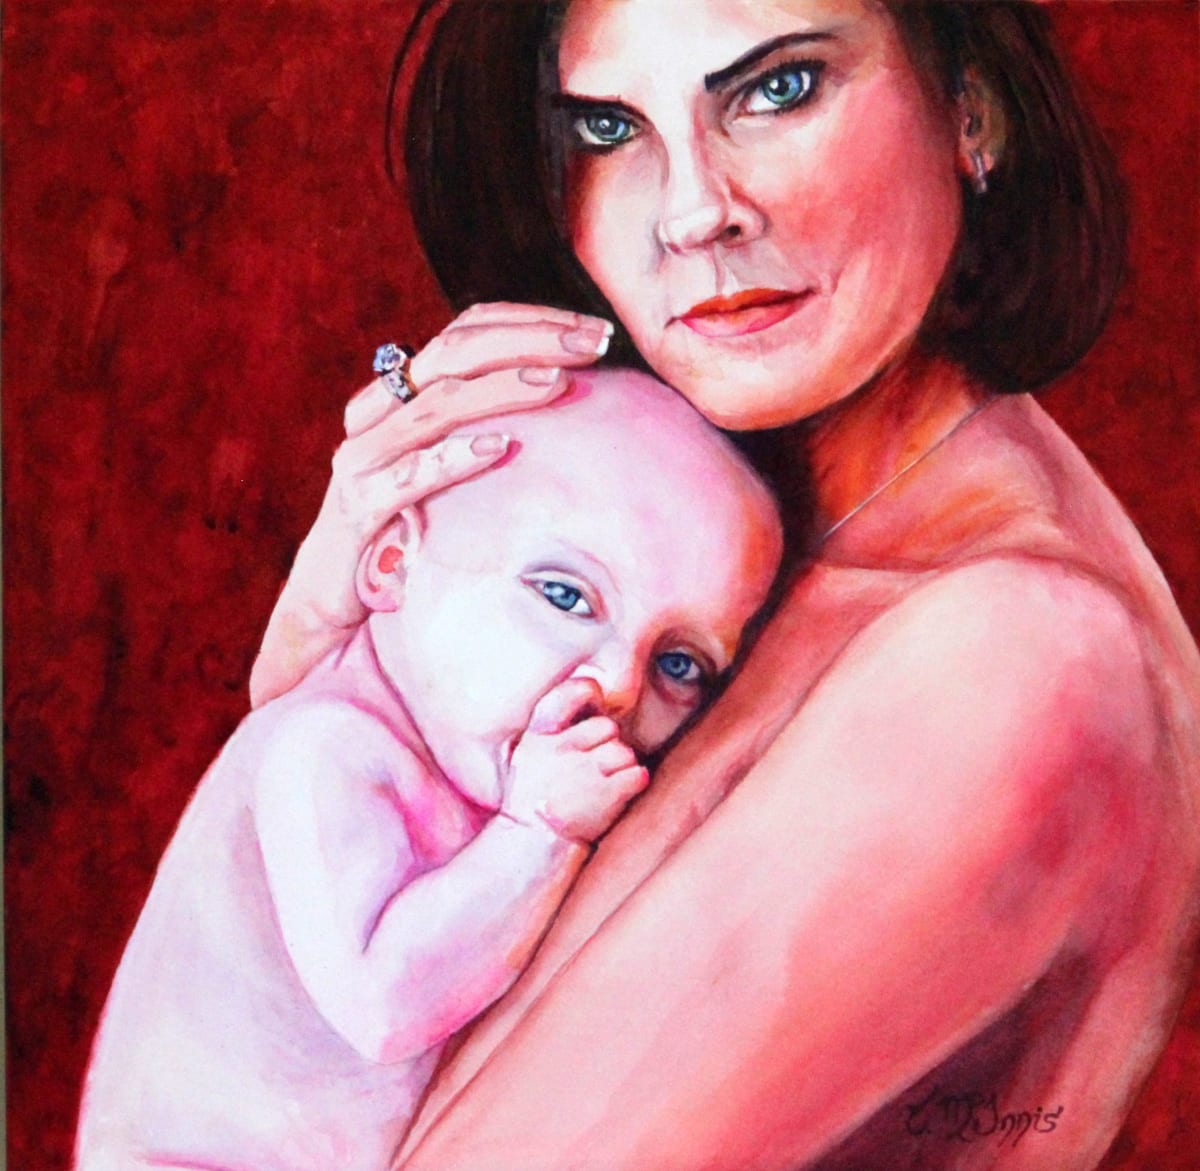 Kim and Baby by Theresia McInnis  Image: Fierce protector. 